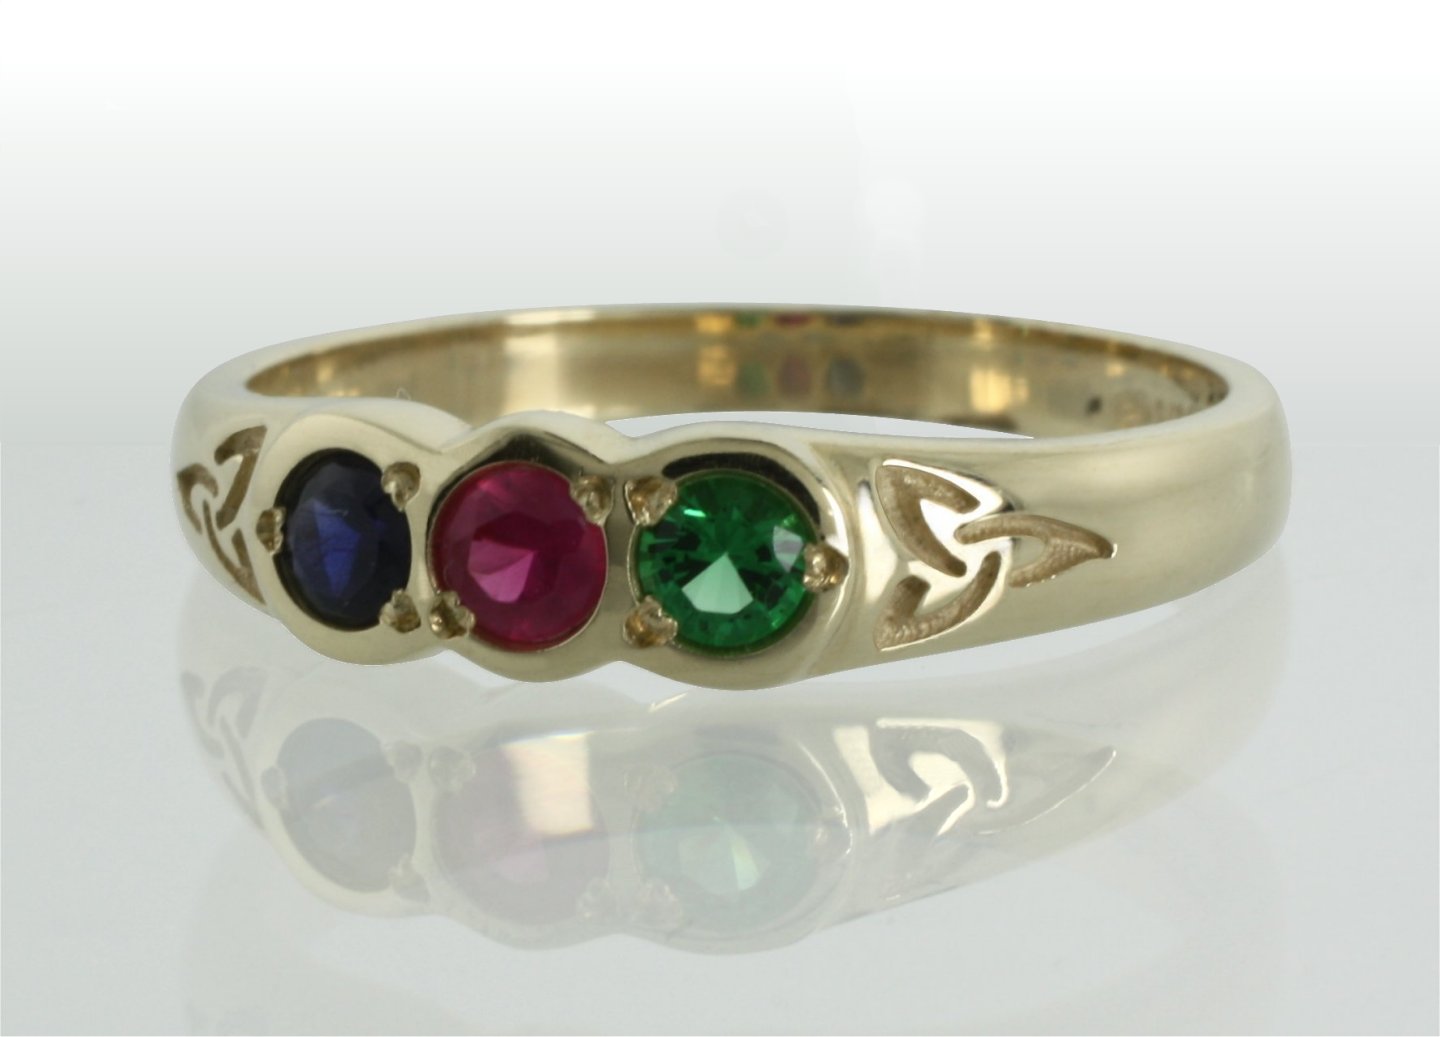 Product image for Family Birthstone Trinity Knot Ring - 3 Stones